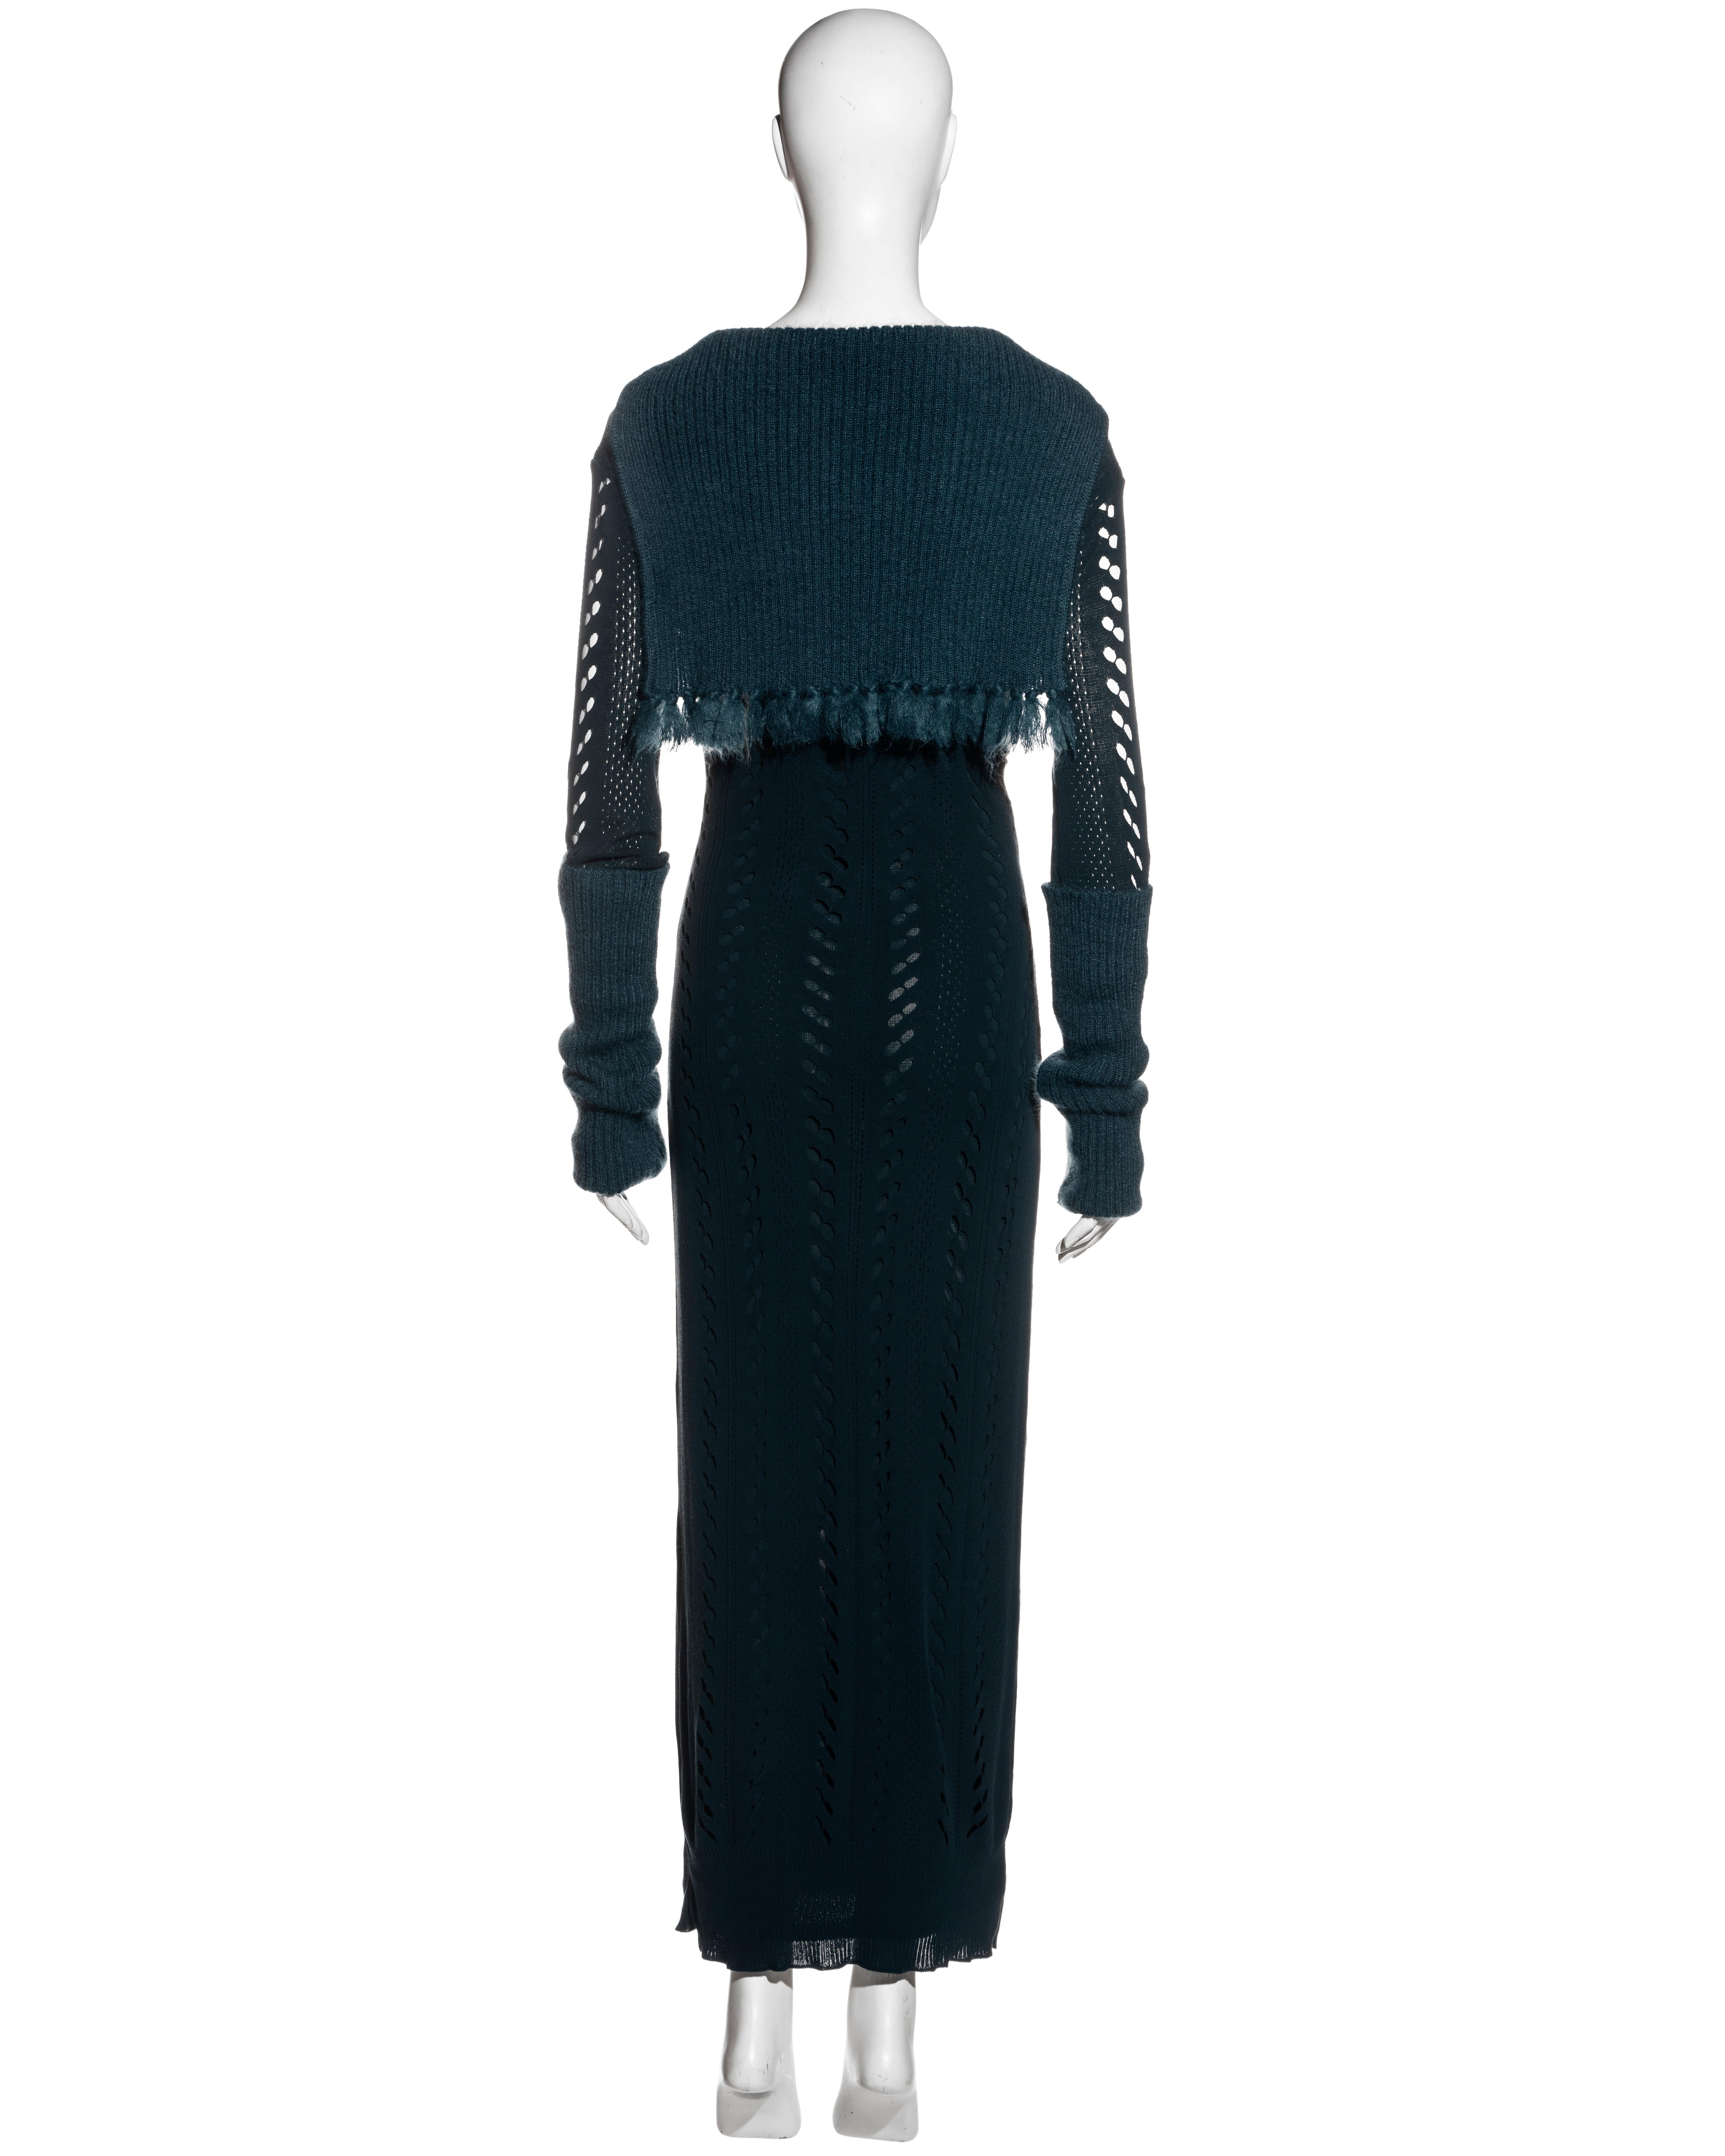 Christian Dior by John Galliano teal laser cut knitted maxi dress, fw 1999 5